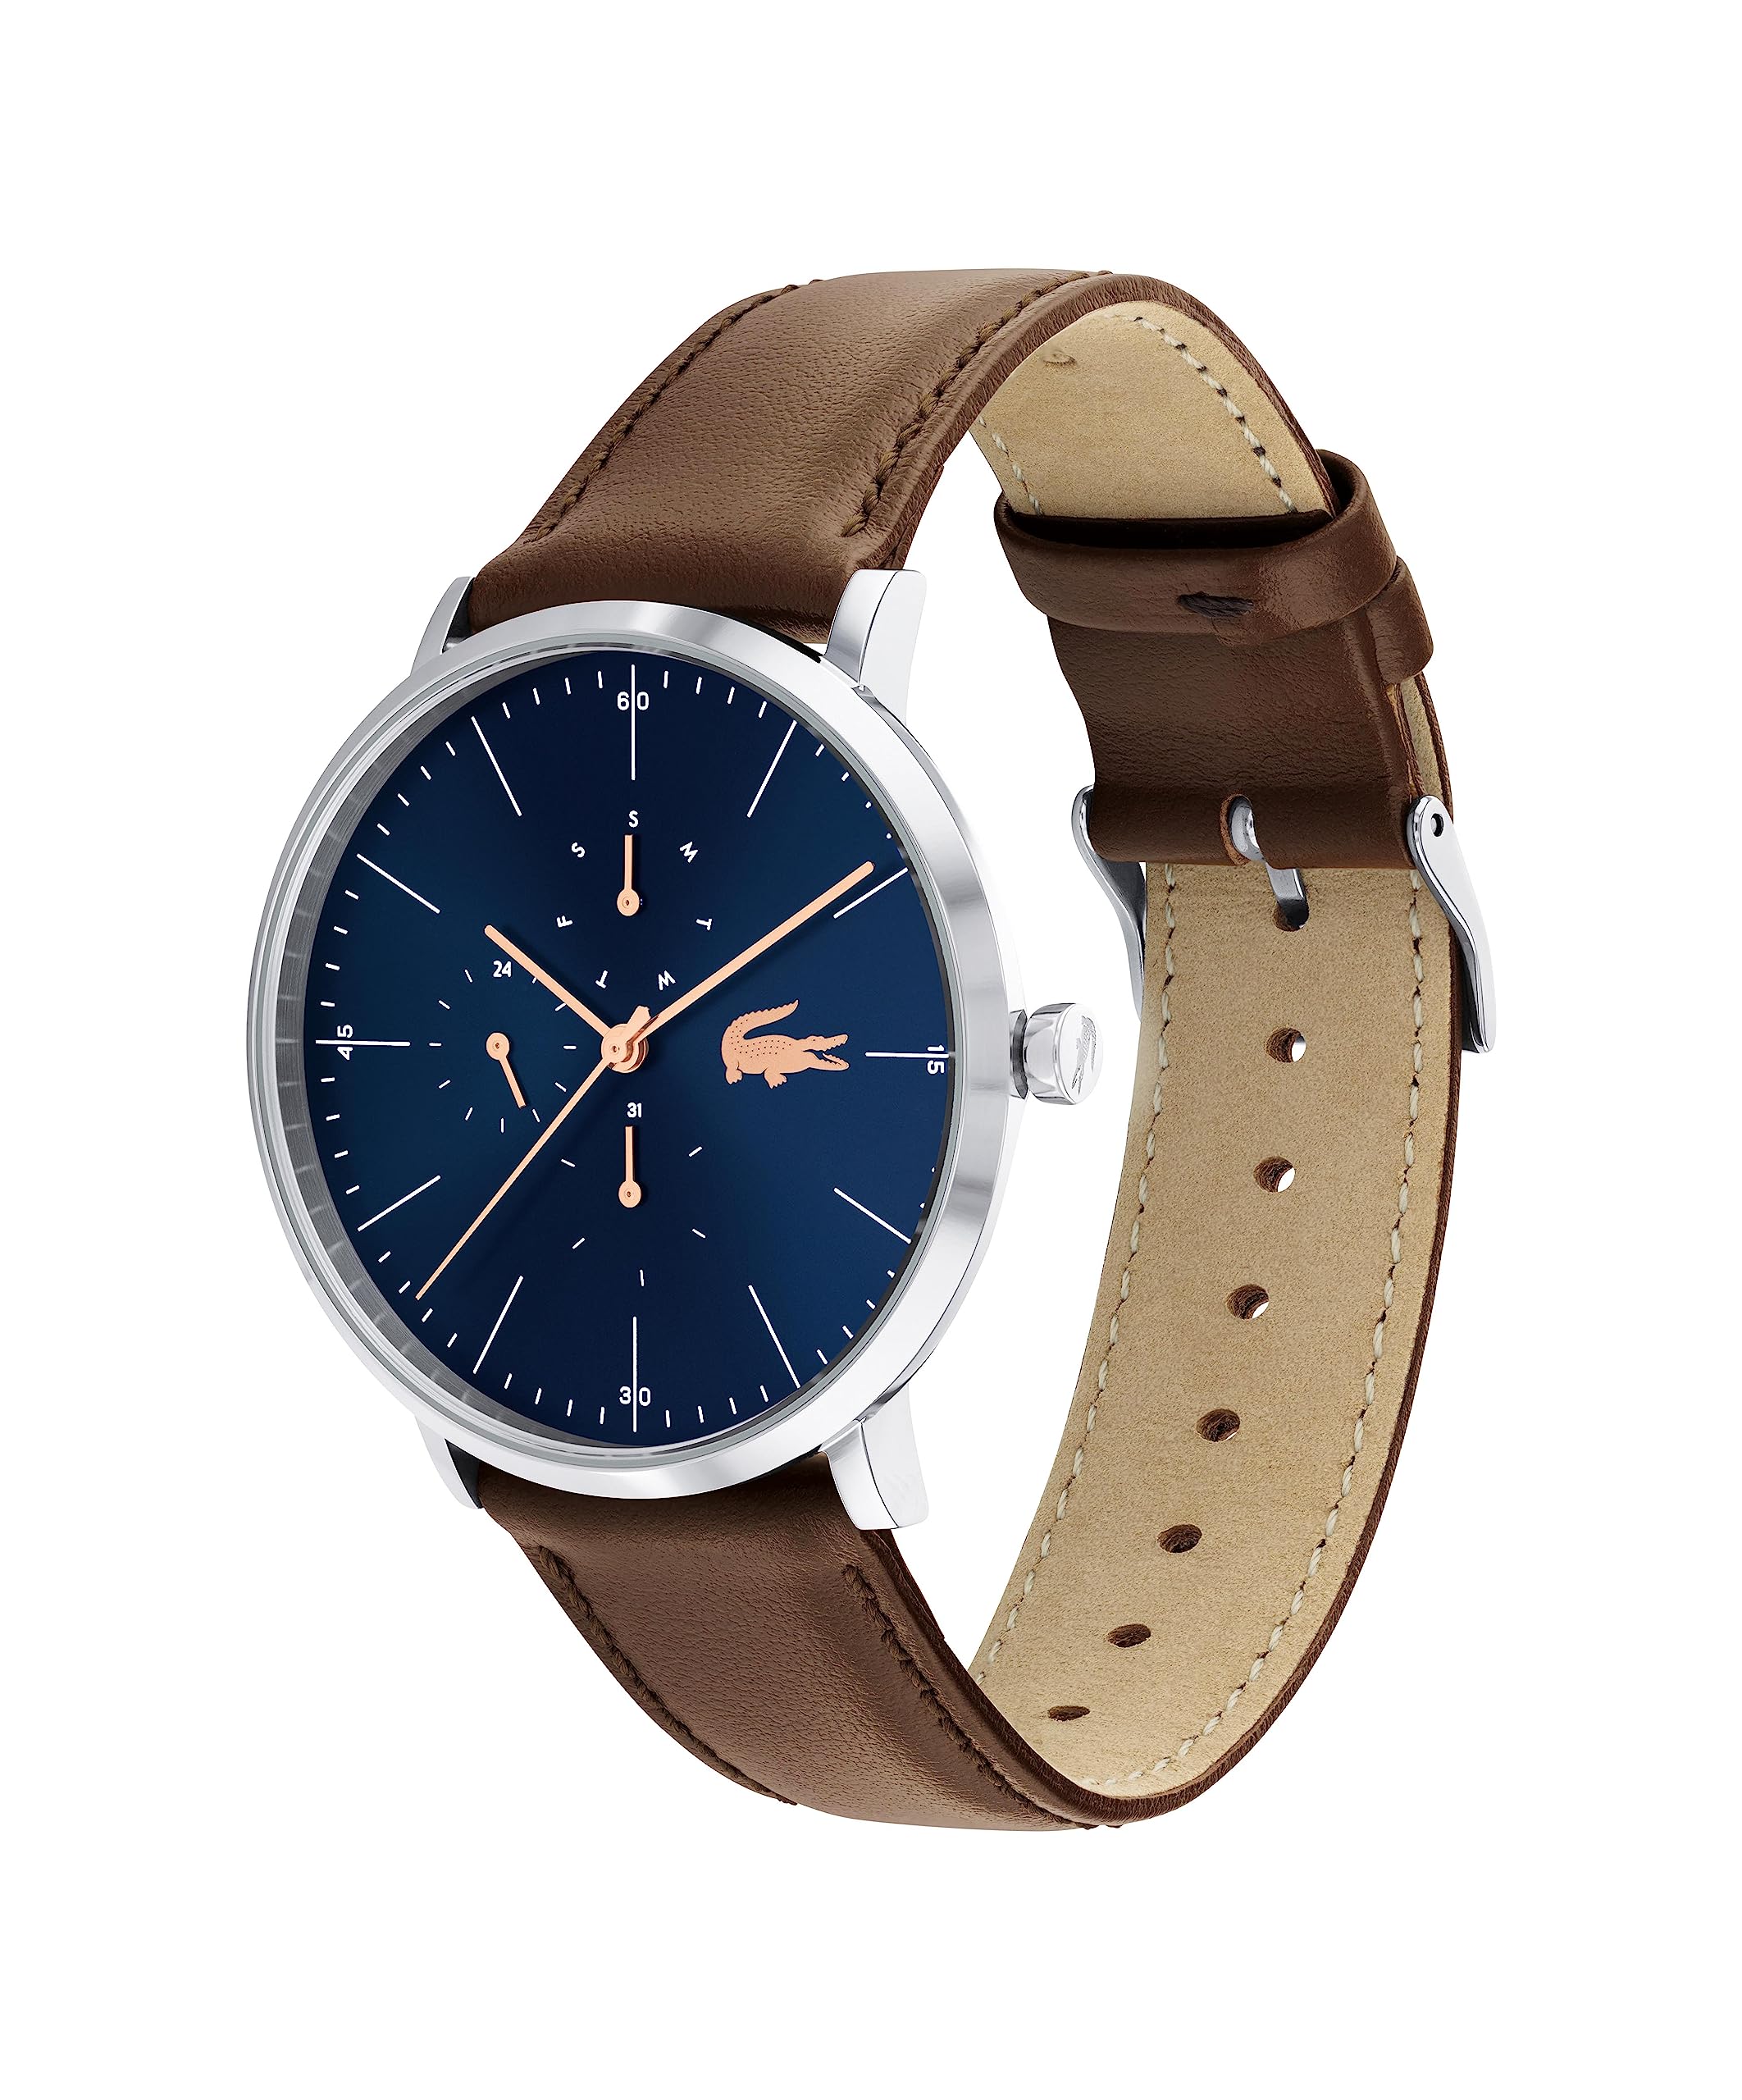 Lacoste Stainless Steel Quartz Watch with Leather Strap, 19.5 (Model: 2010976), Brown